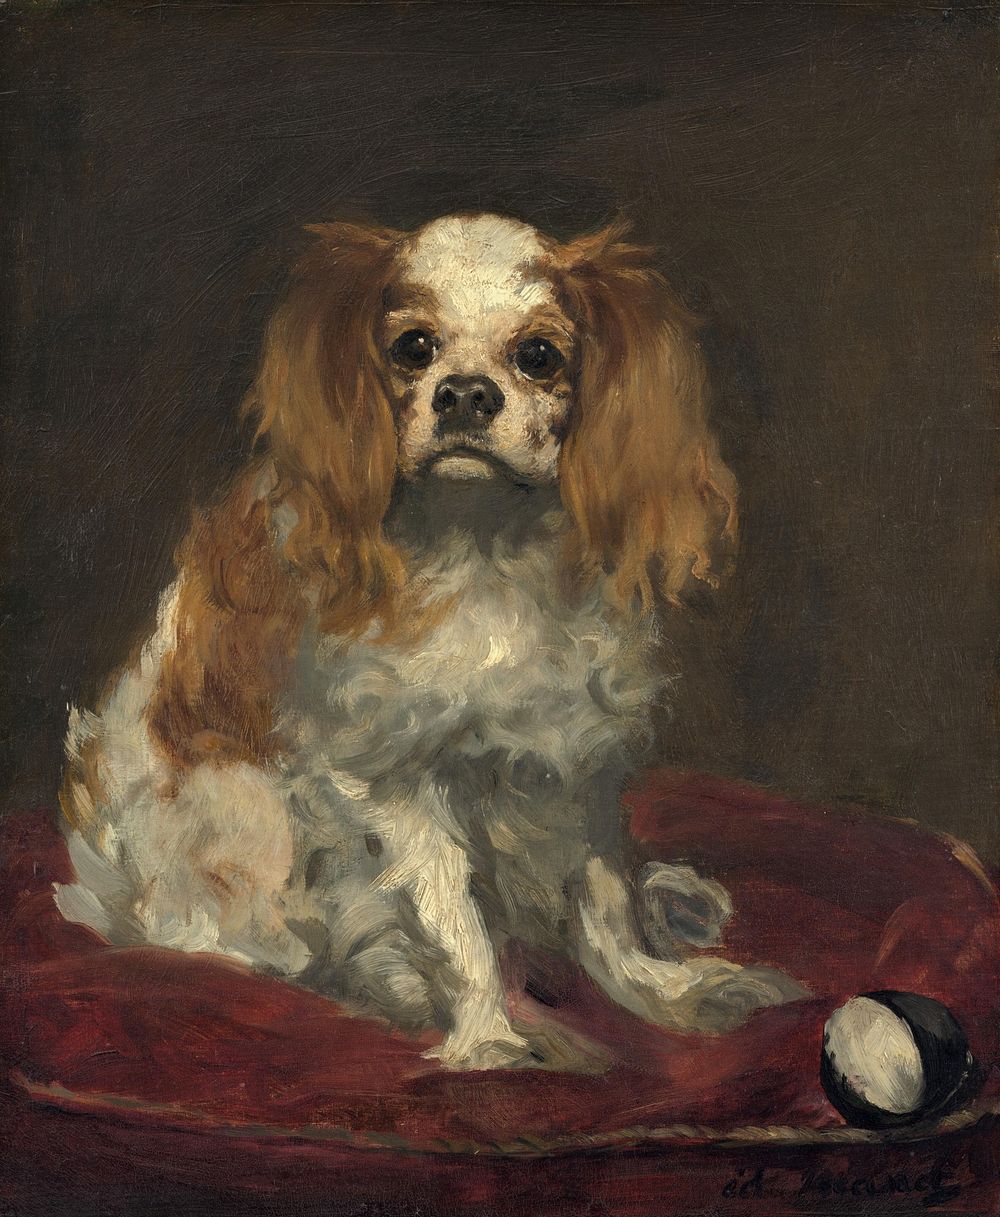 A King Charles Spaniel (c. 1866) painting in high resolution by Edouard Manet.  